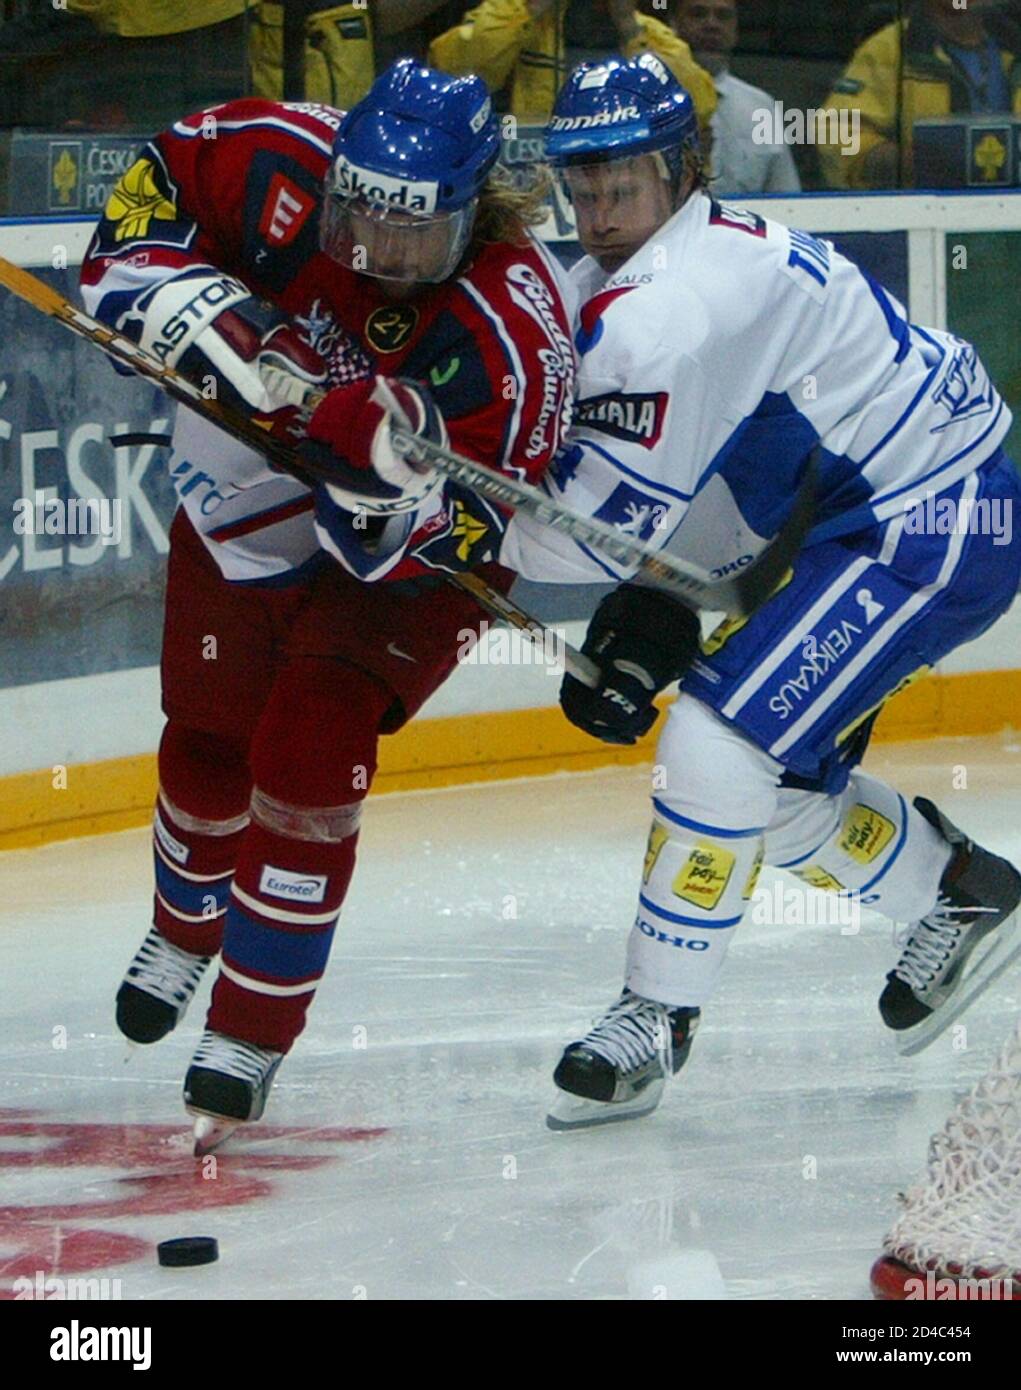 Czech Petr Sykora of Anaheim challenges Finland's Kimmo Timonen of Nashville Predators during the friendly ice hockey match.  Czech Republic's Petr Sykora (L) challenges Finland's Kimmo Timonen during the friendly ice hockey match between the Czech Republic and Finland in Prague, August 23, 2004. The match ended in 1-1 tie. REUTERS/Petr Josek Stock Photo